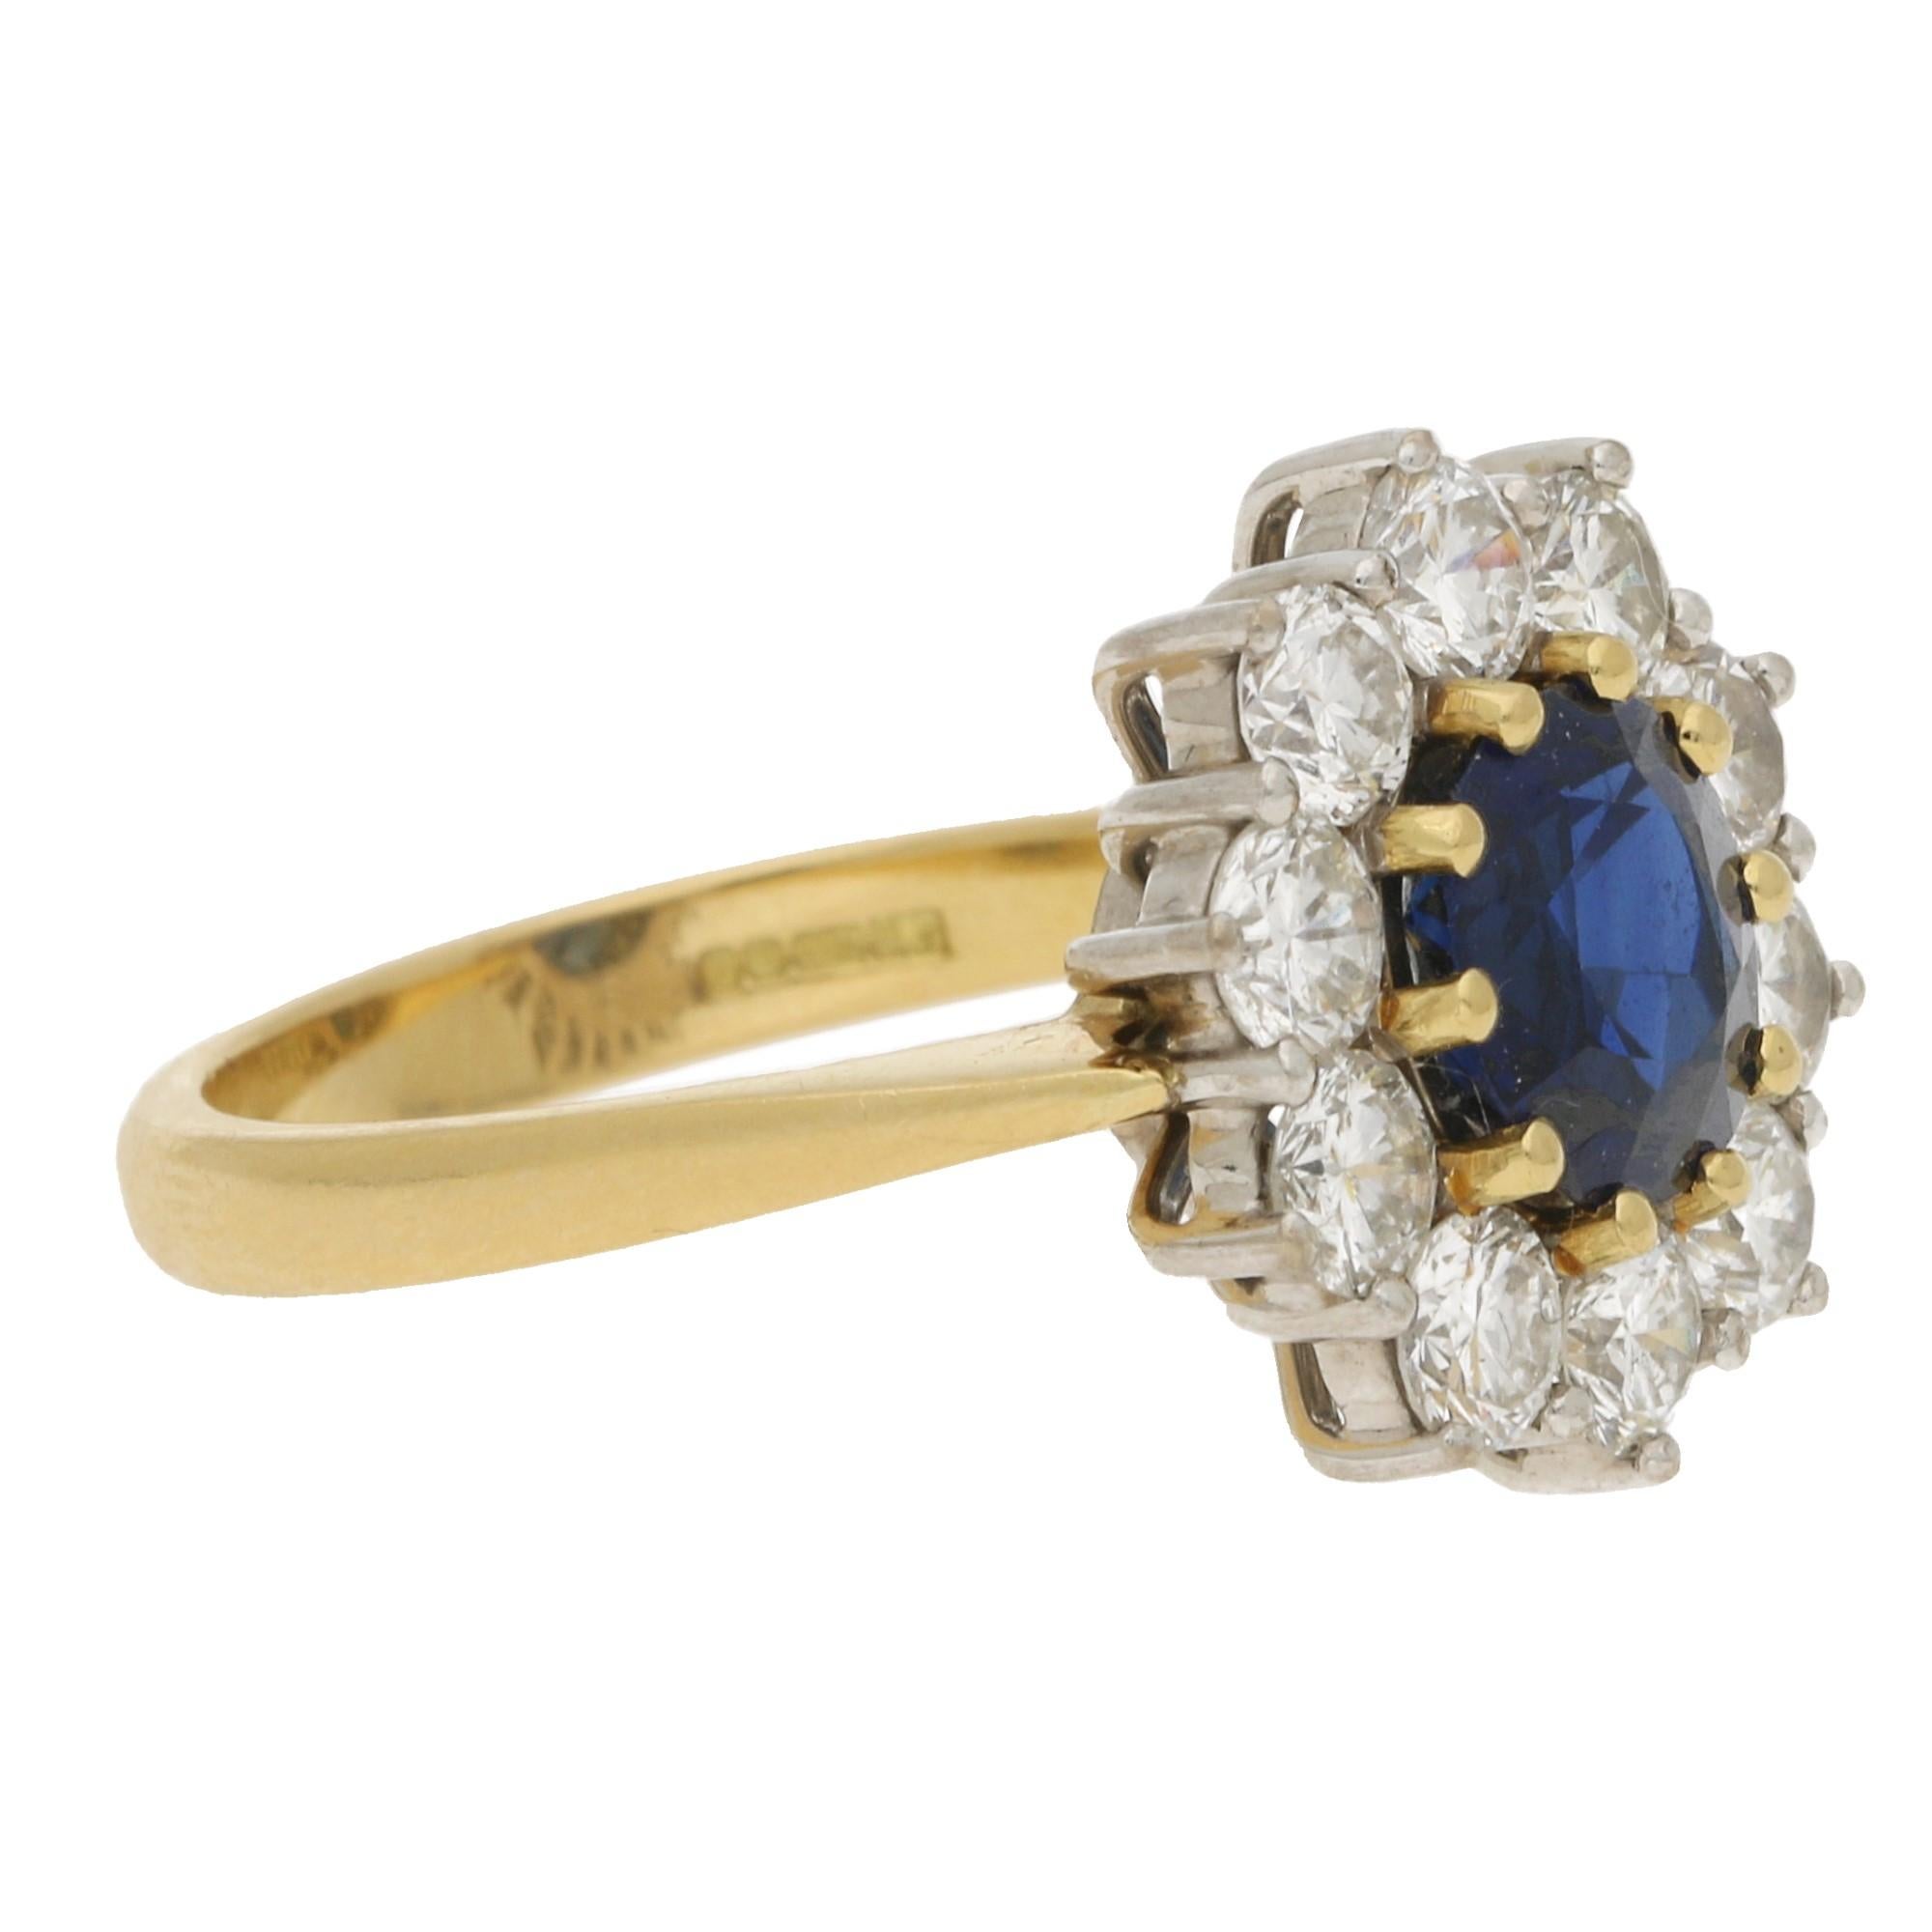 A beautiful Princess Diana style sapphire and diamond cluster engagement ring set in 18k yellow and white gold.

The ring is centrally 10 claw set with a beautiful royal blue coloured round cut sapphire surrounded by a cluster of 10 round brilliant